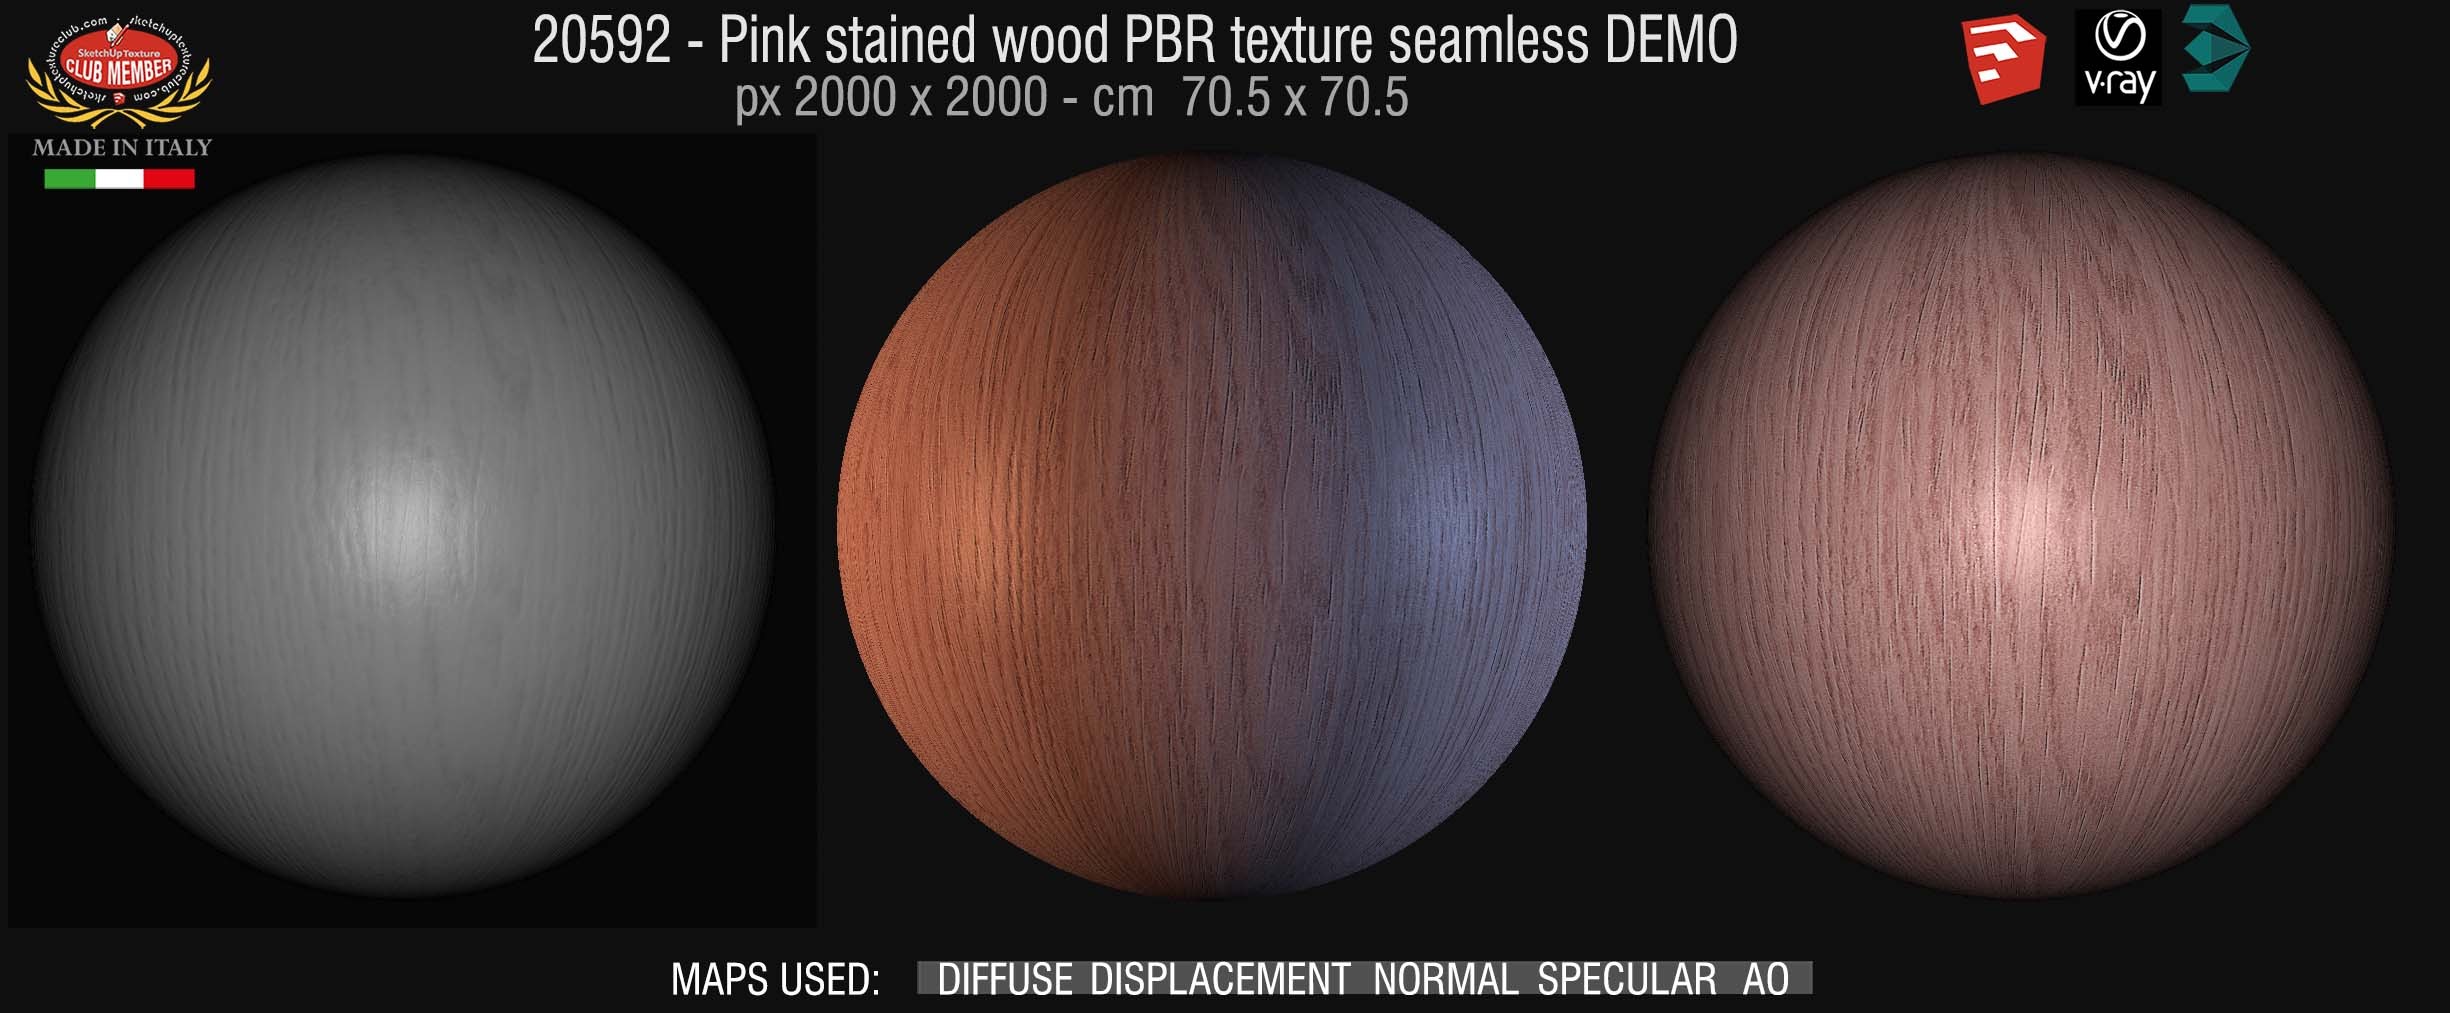 20592 Pink stained wood PBR texture seamless DEMO